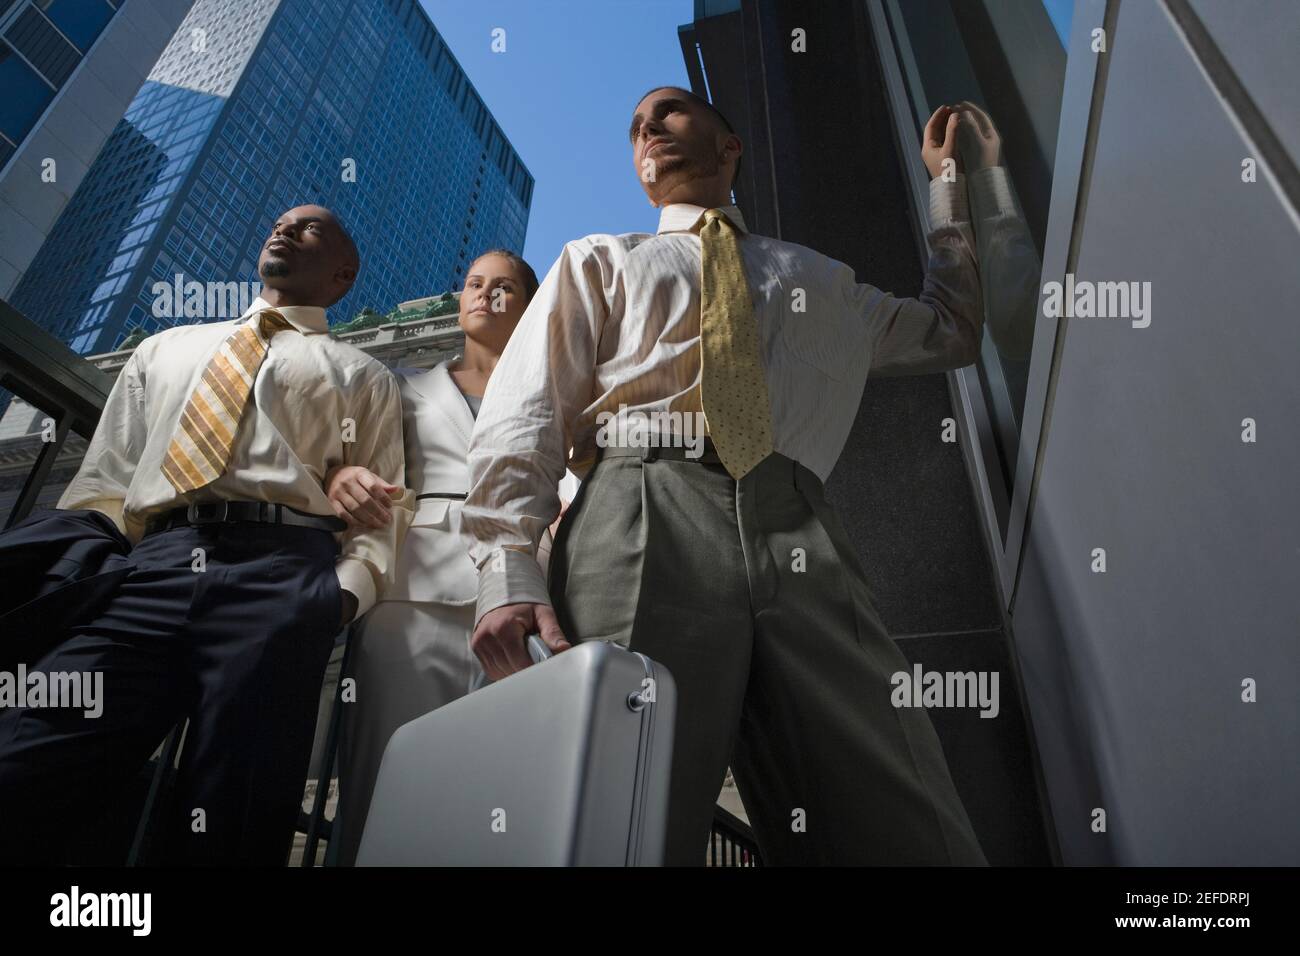 Low angle view of two businessmen and a businesswoman standing together Stock Photo